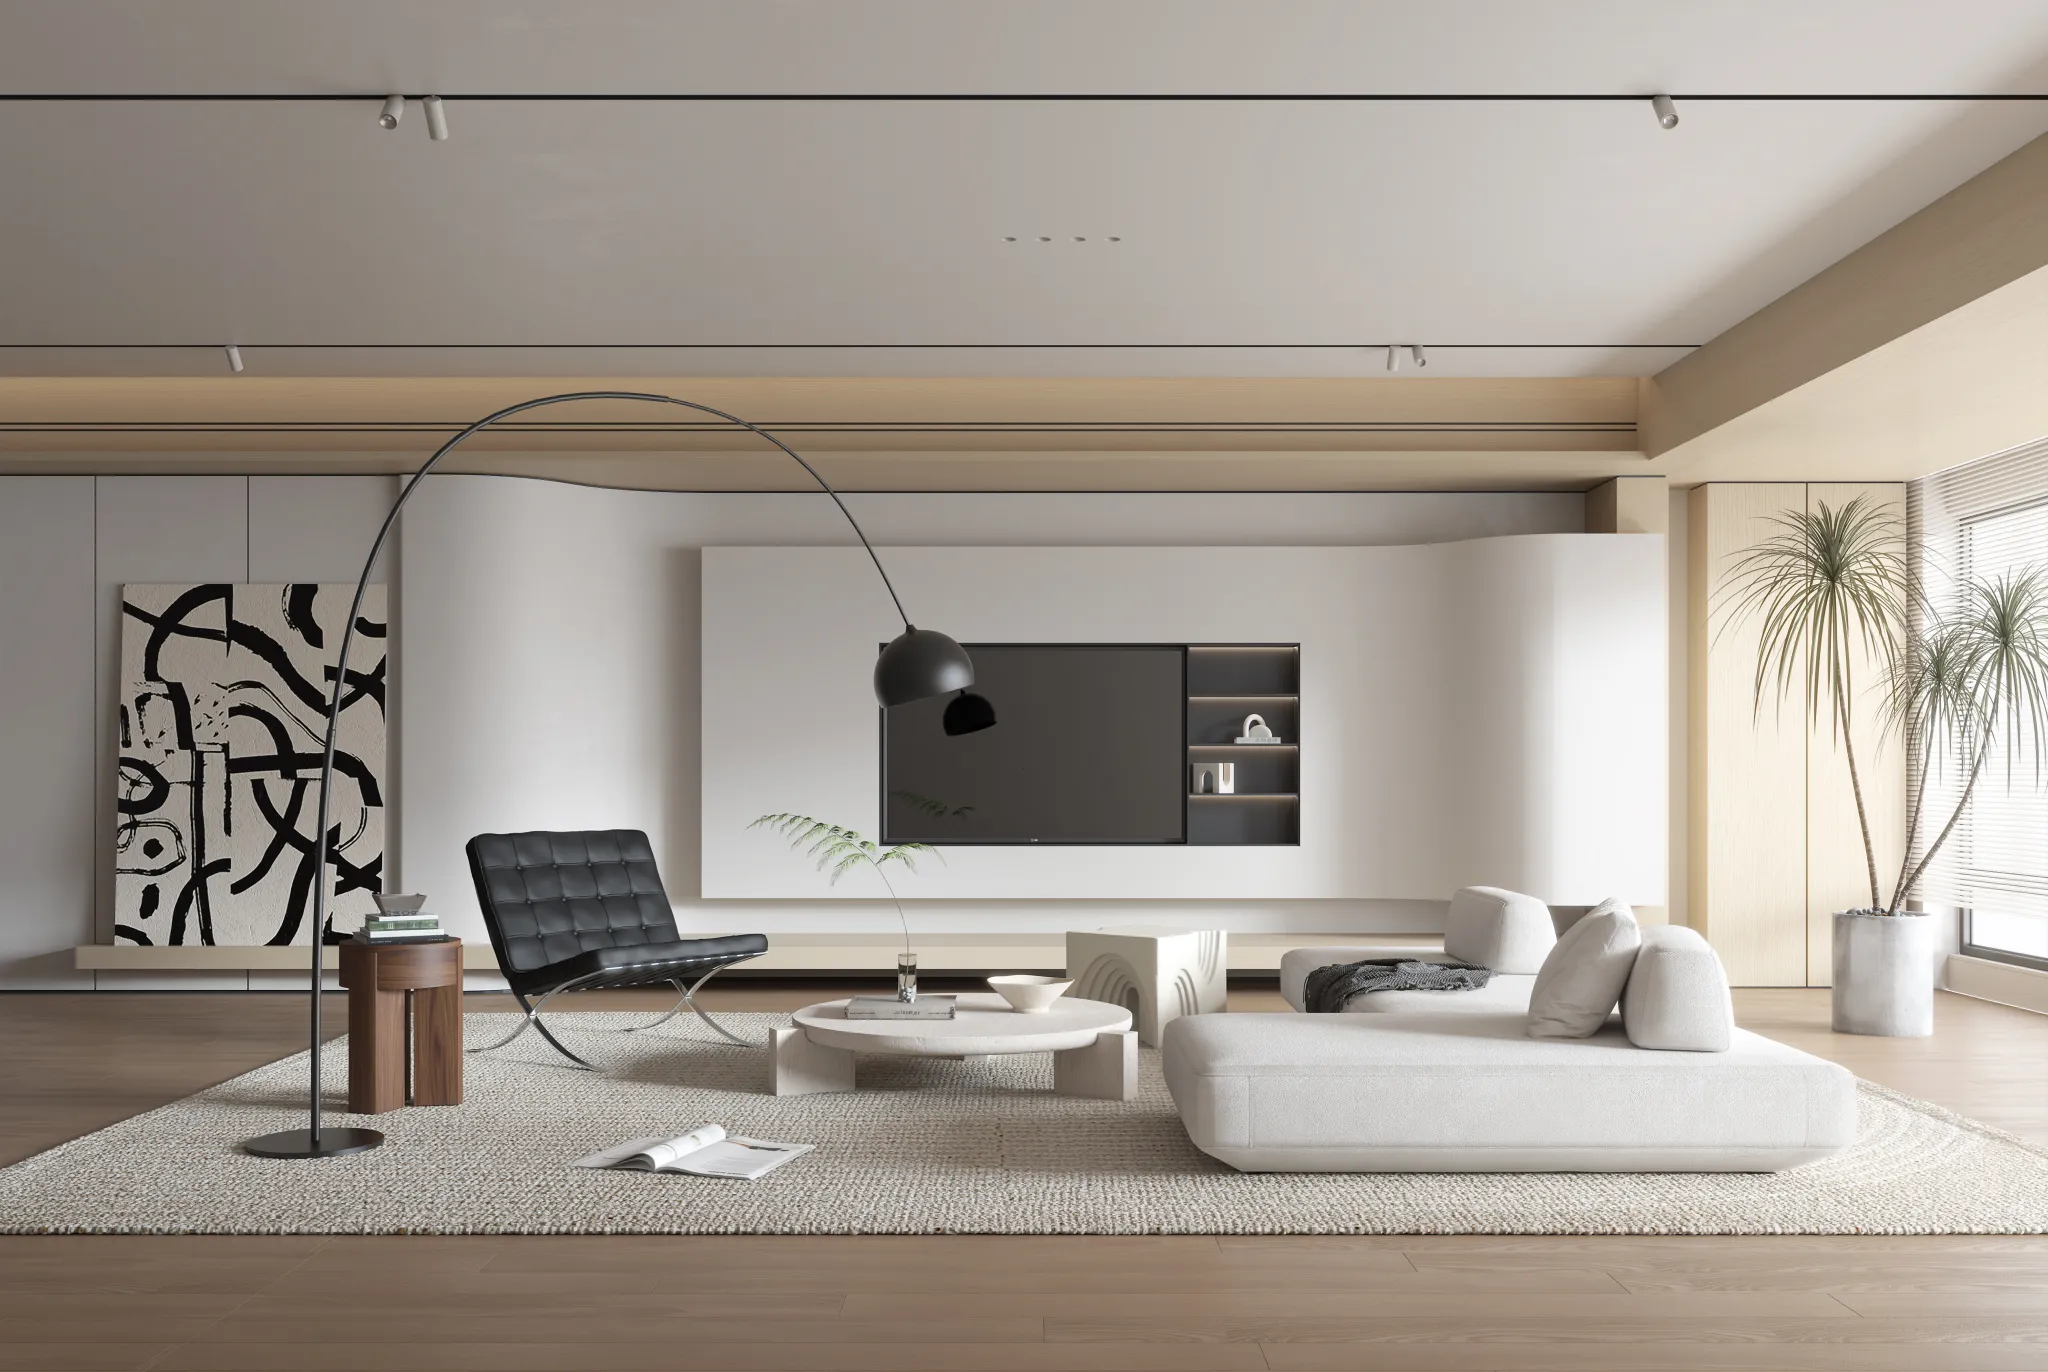 HOUSE SPACE 3D SCENES – LIVING ROOM – 0125